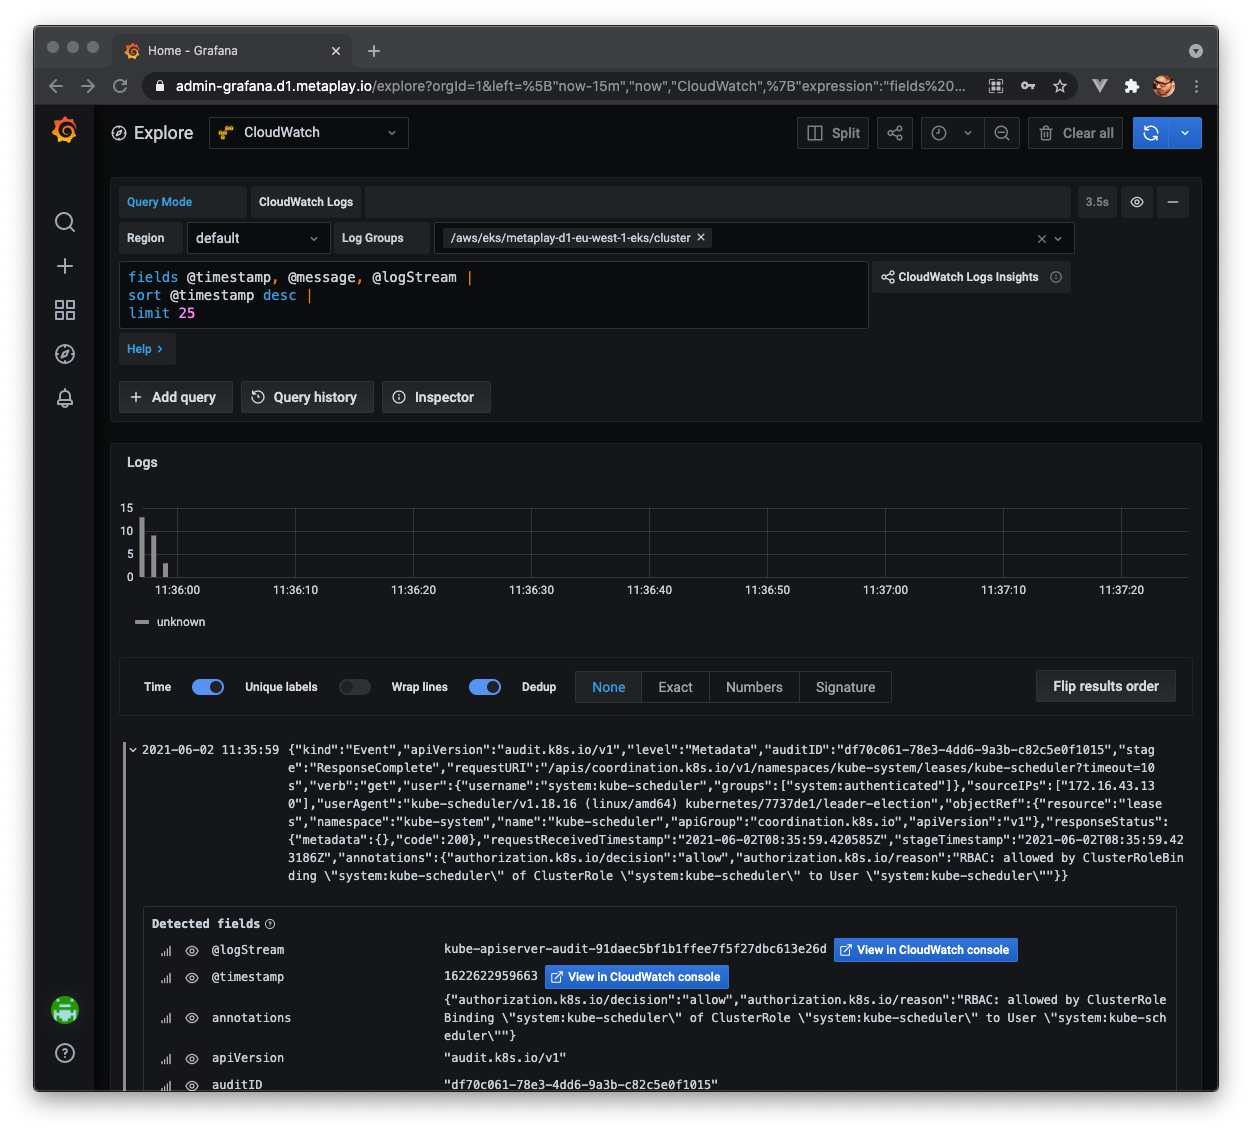 Grafana's Explore section allows you to query different sources of data, like CloudWatch Logs